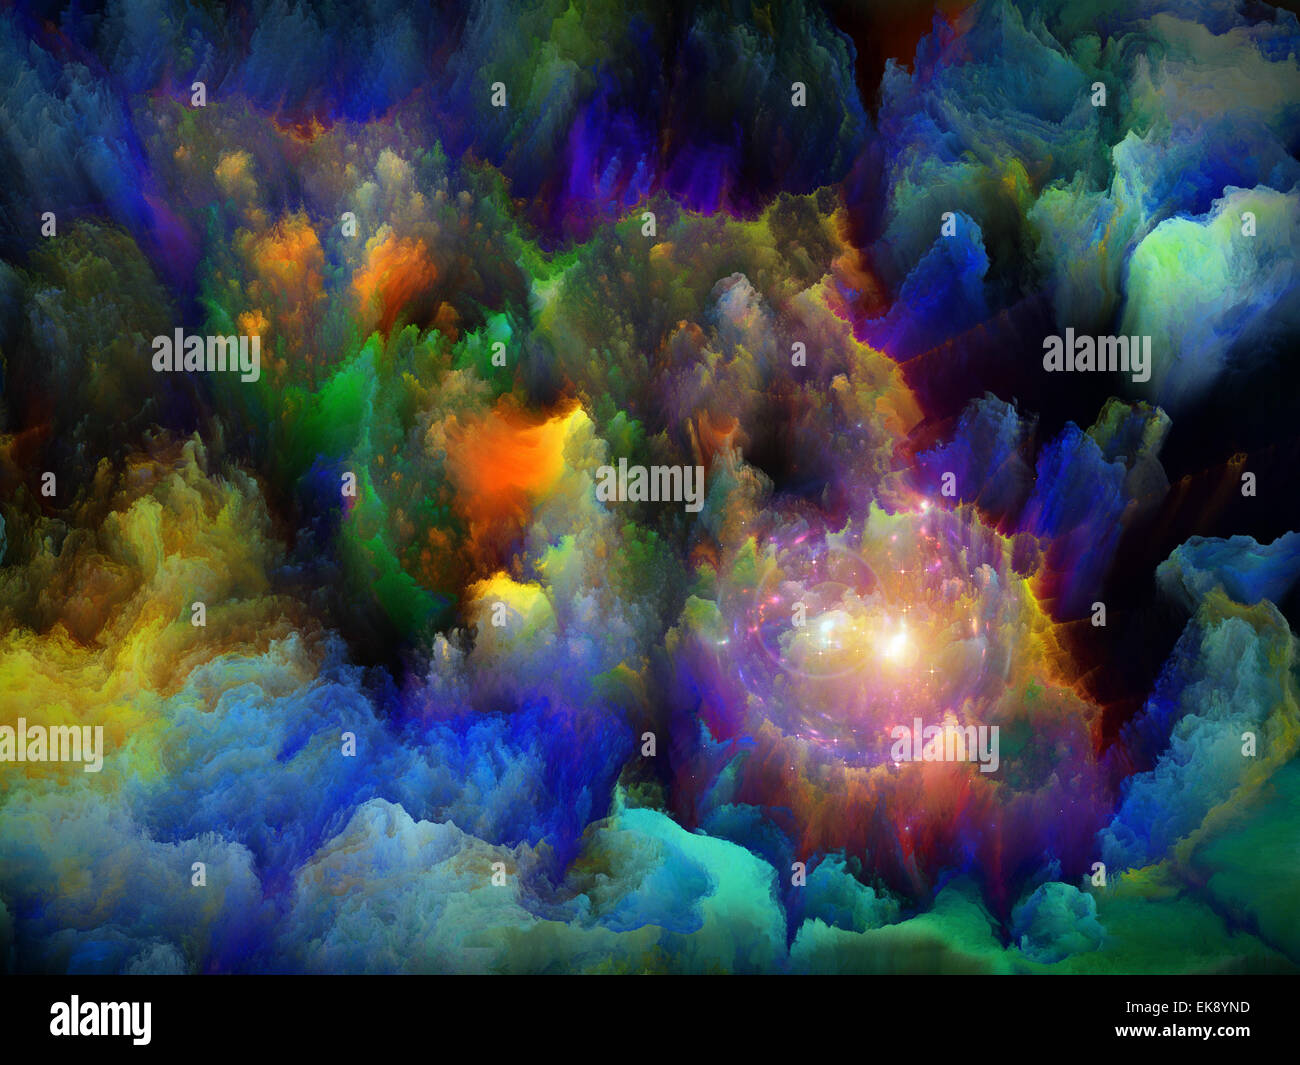 Digital Bloom Abstraction Stock Photo